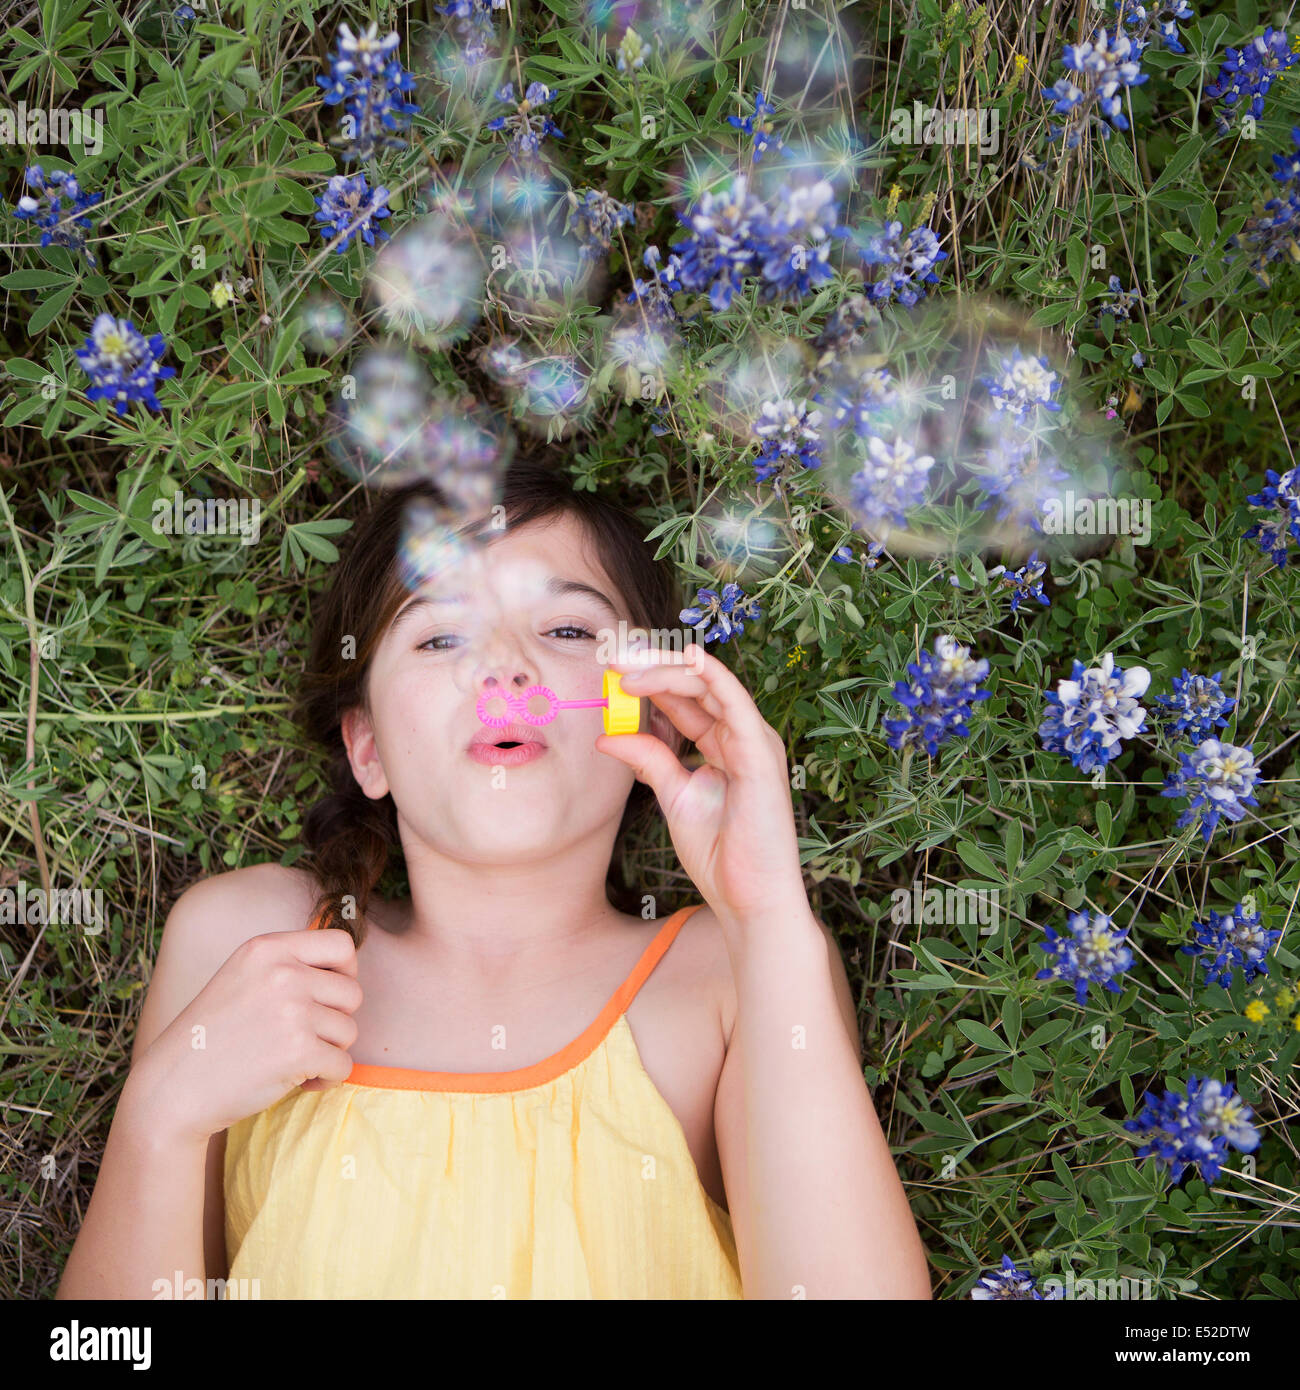 A girl lying on her back blowing bubbles in the air. Stock Photo